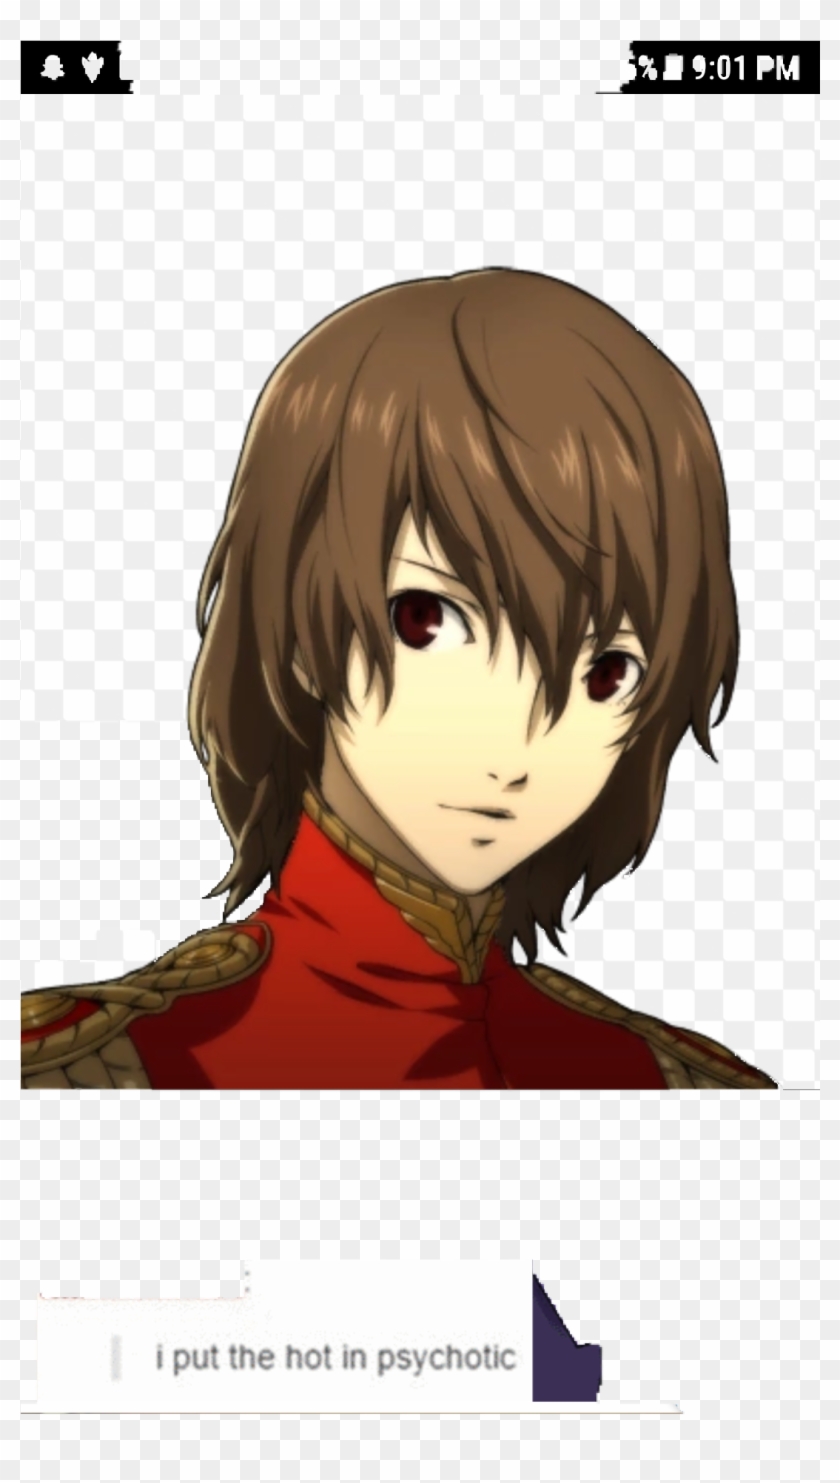 Persona 5 Textpost Meme Lol I Totally Know How To Photoshop - Persona 5 Akechi Portrait Clipart #5749265